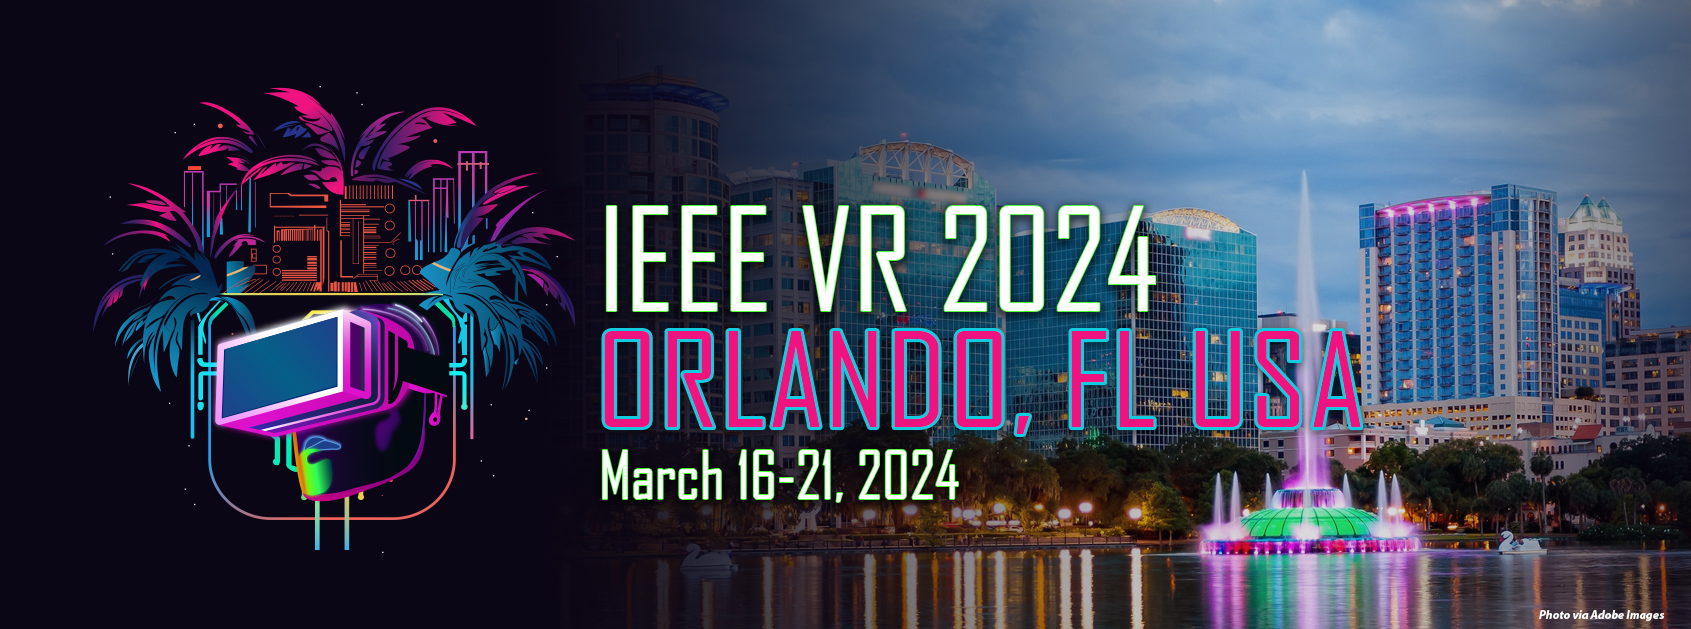 Home | IEEE VR 2024